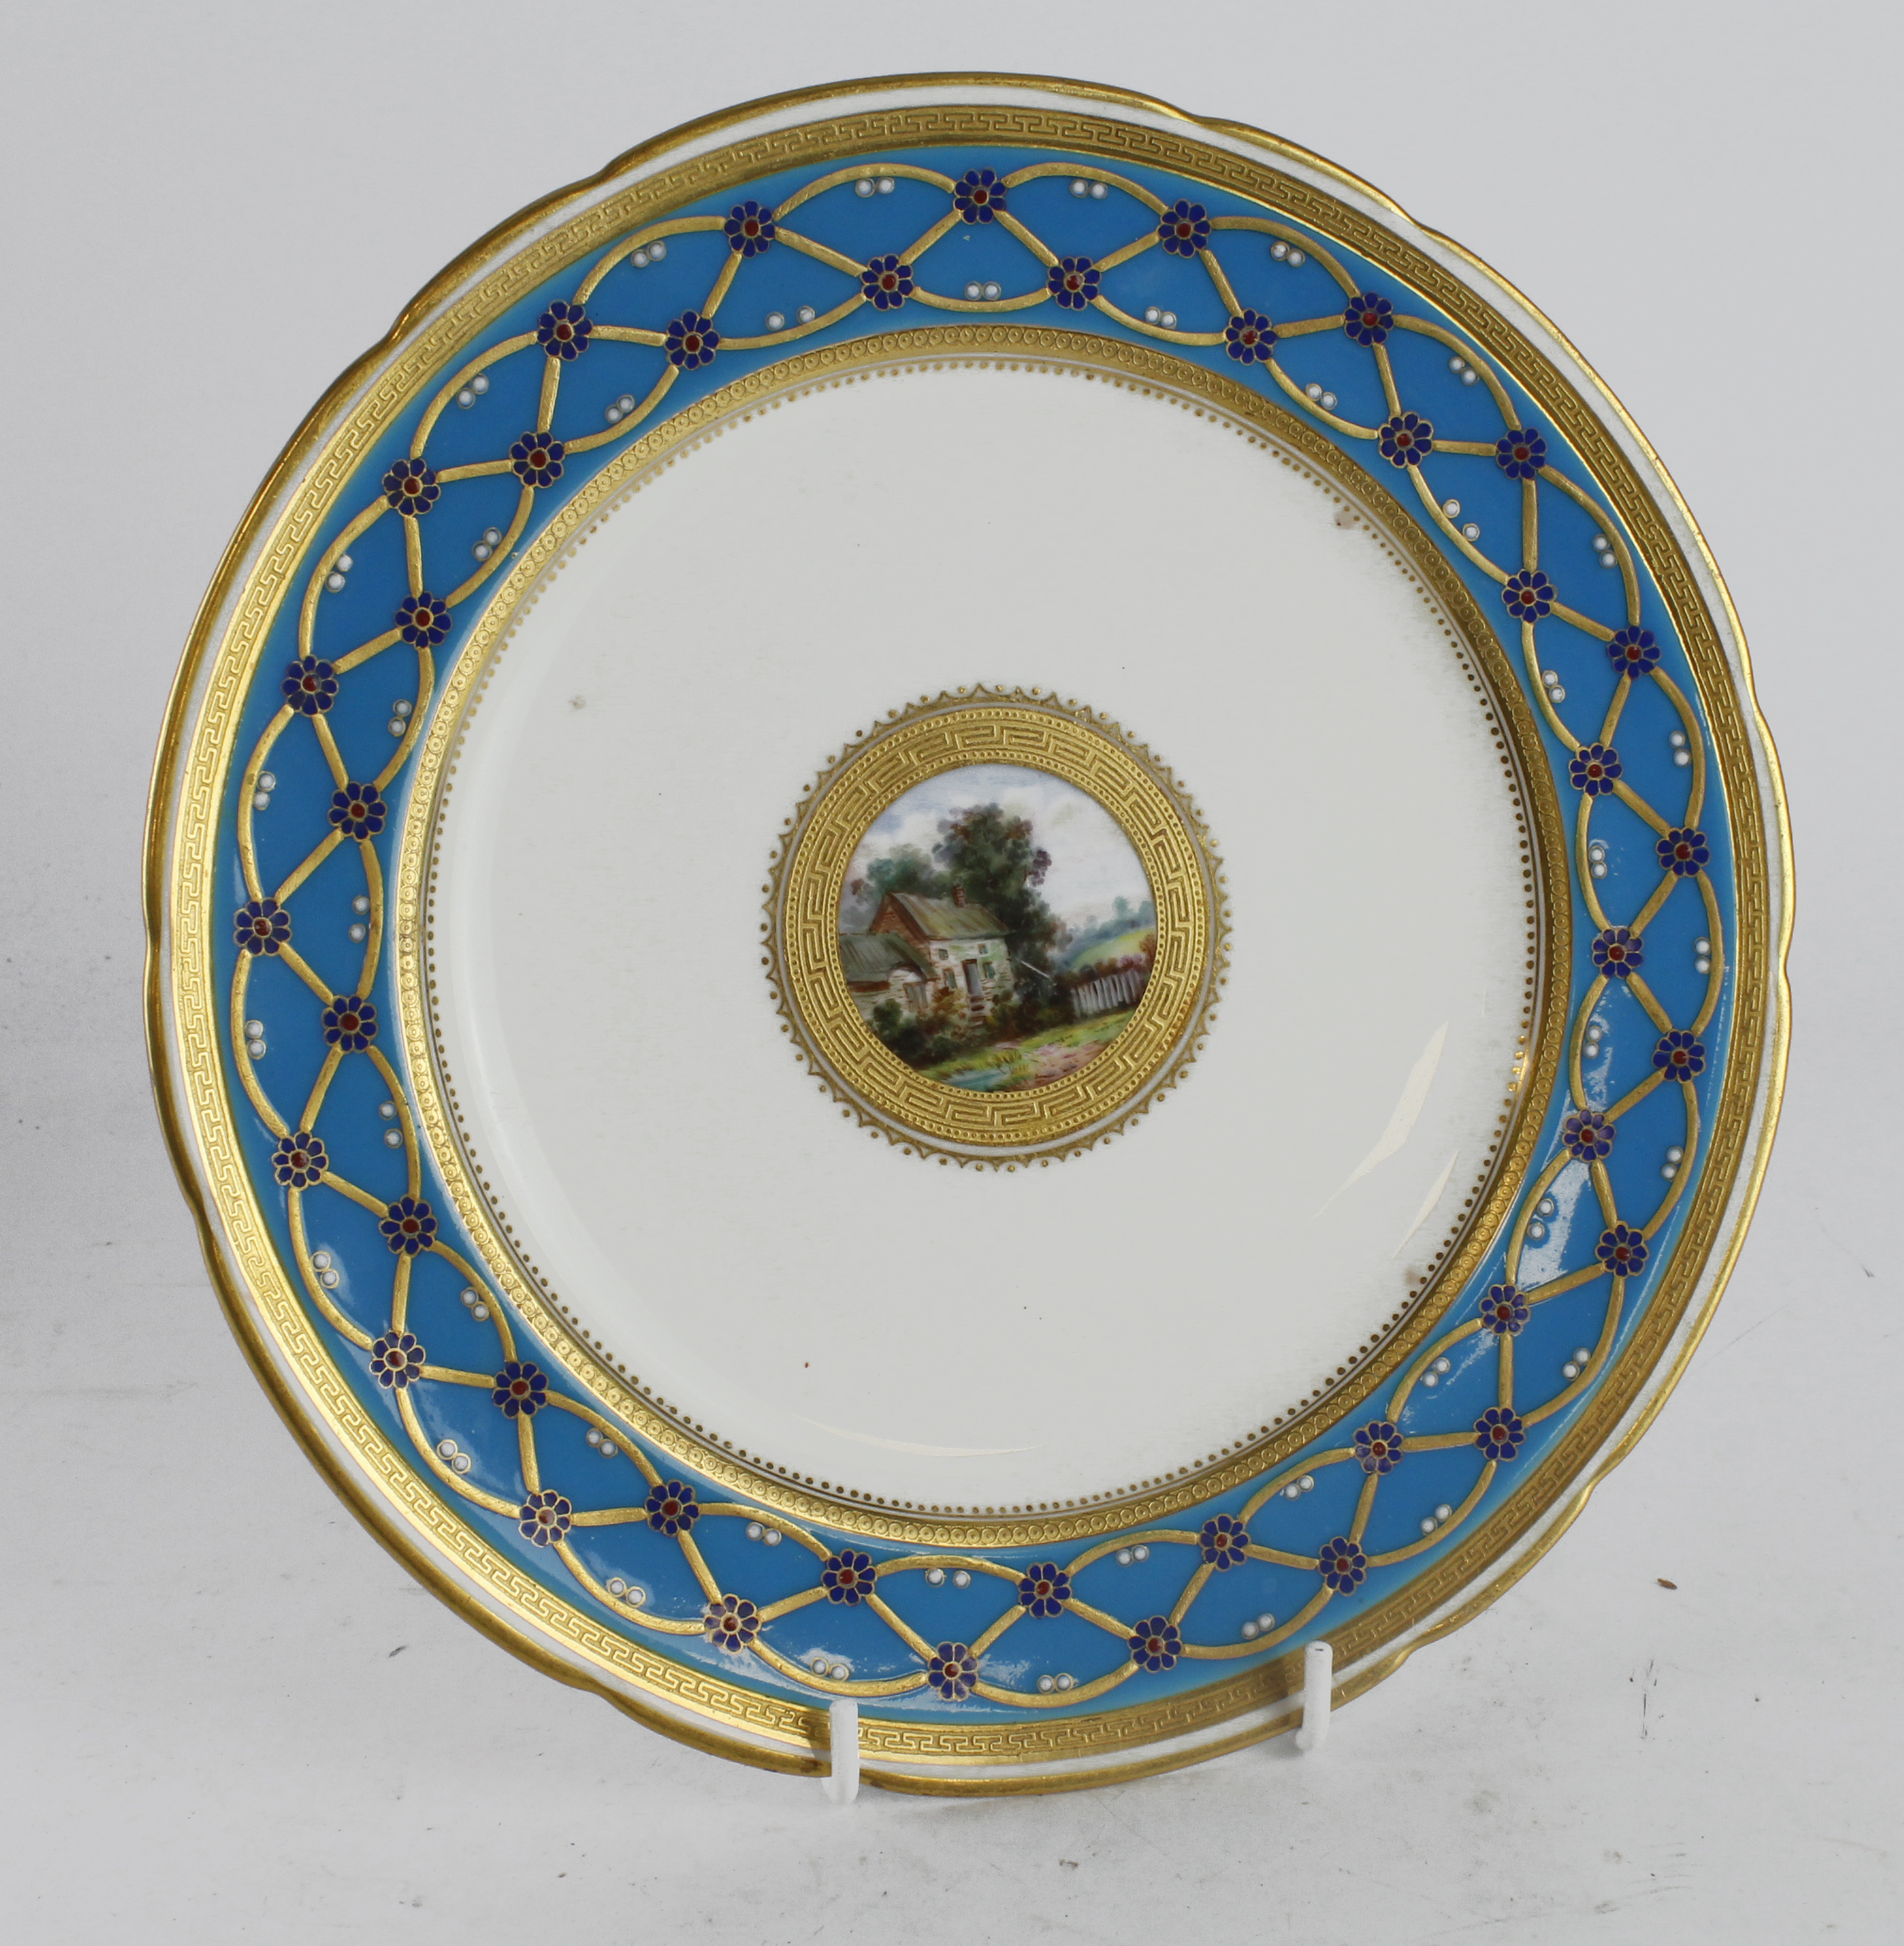 Minton cabinet plate, with blue and gilt floral decorated surround with central hand painted